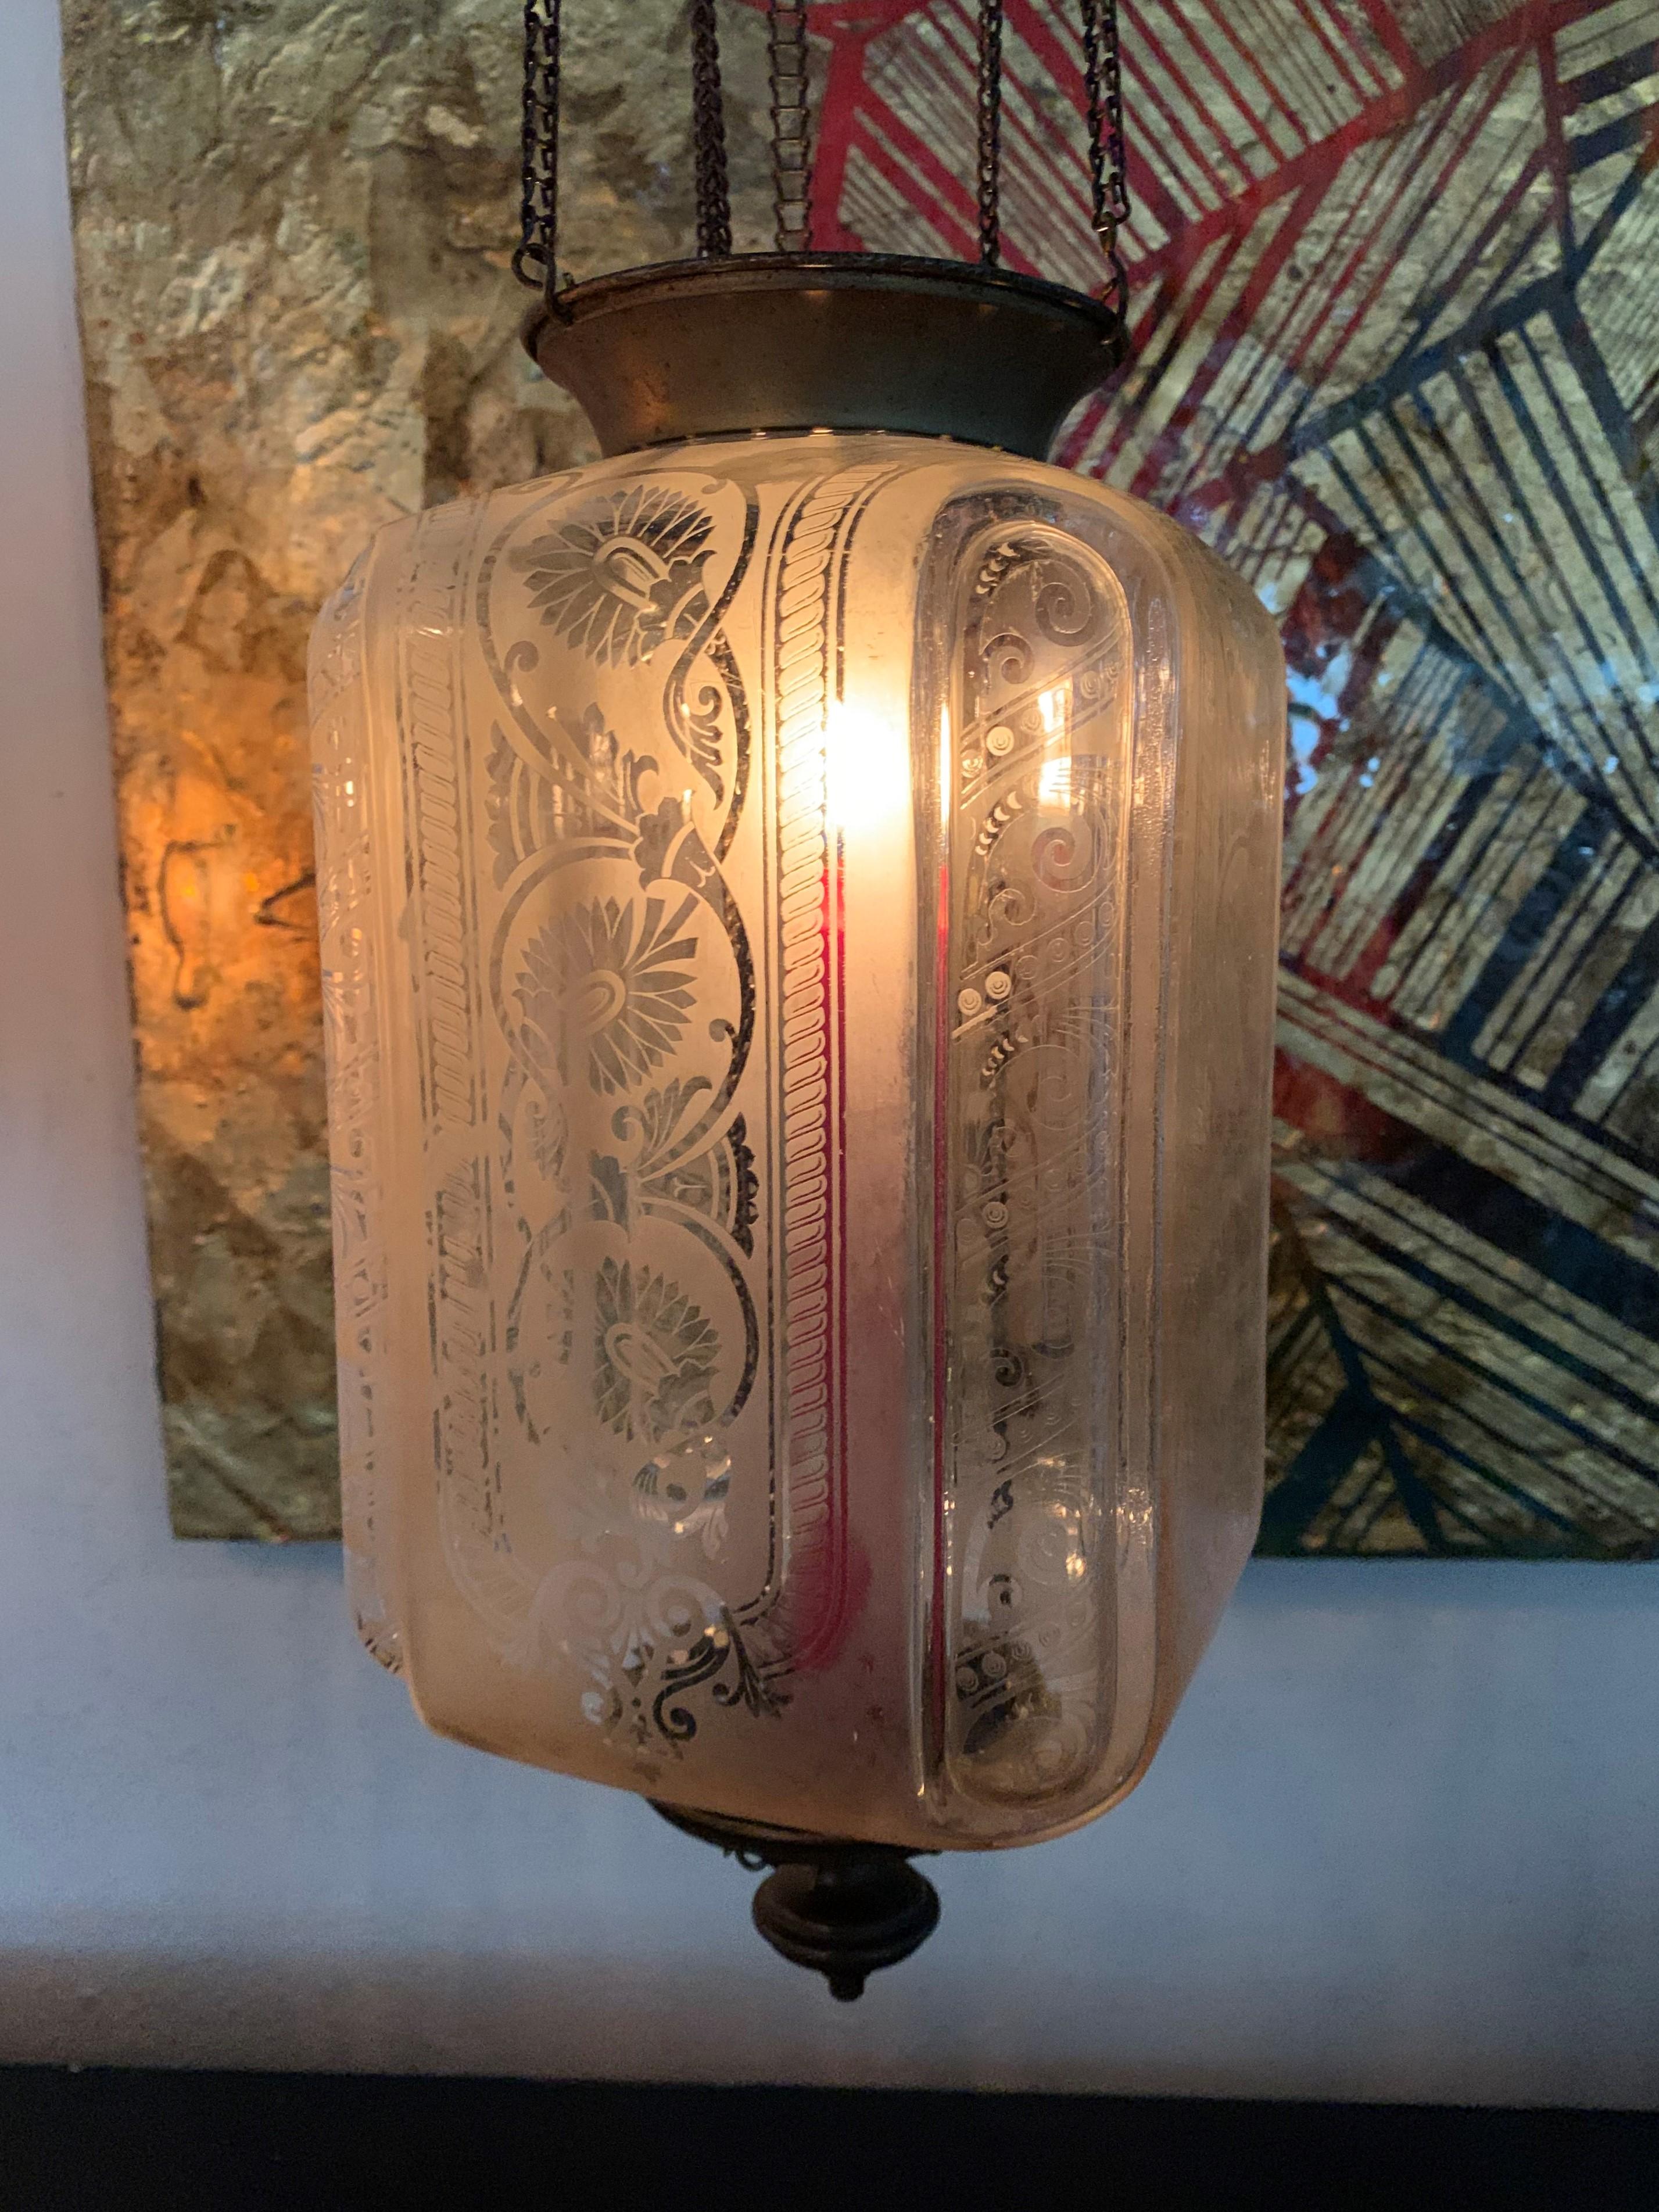 Late 19th or early 20th century glass Lanterns by Baccarat France, marked Baccarat Depose.
Produced in an art nouveau style with palmettes and scrolls
It can hold a candle as depicted (we recommend using battery operated candles for safety issues)